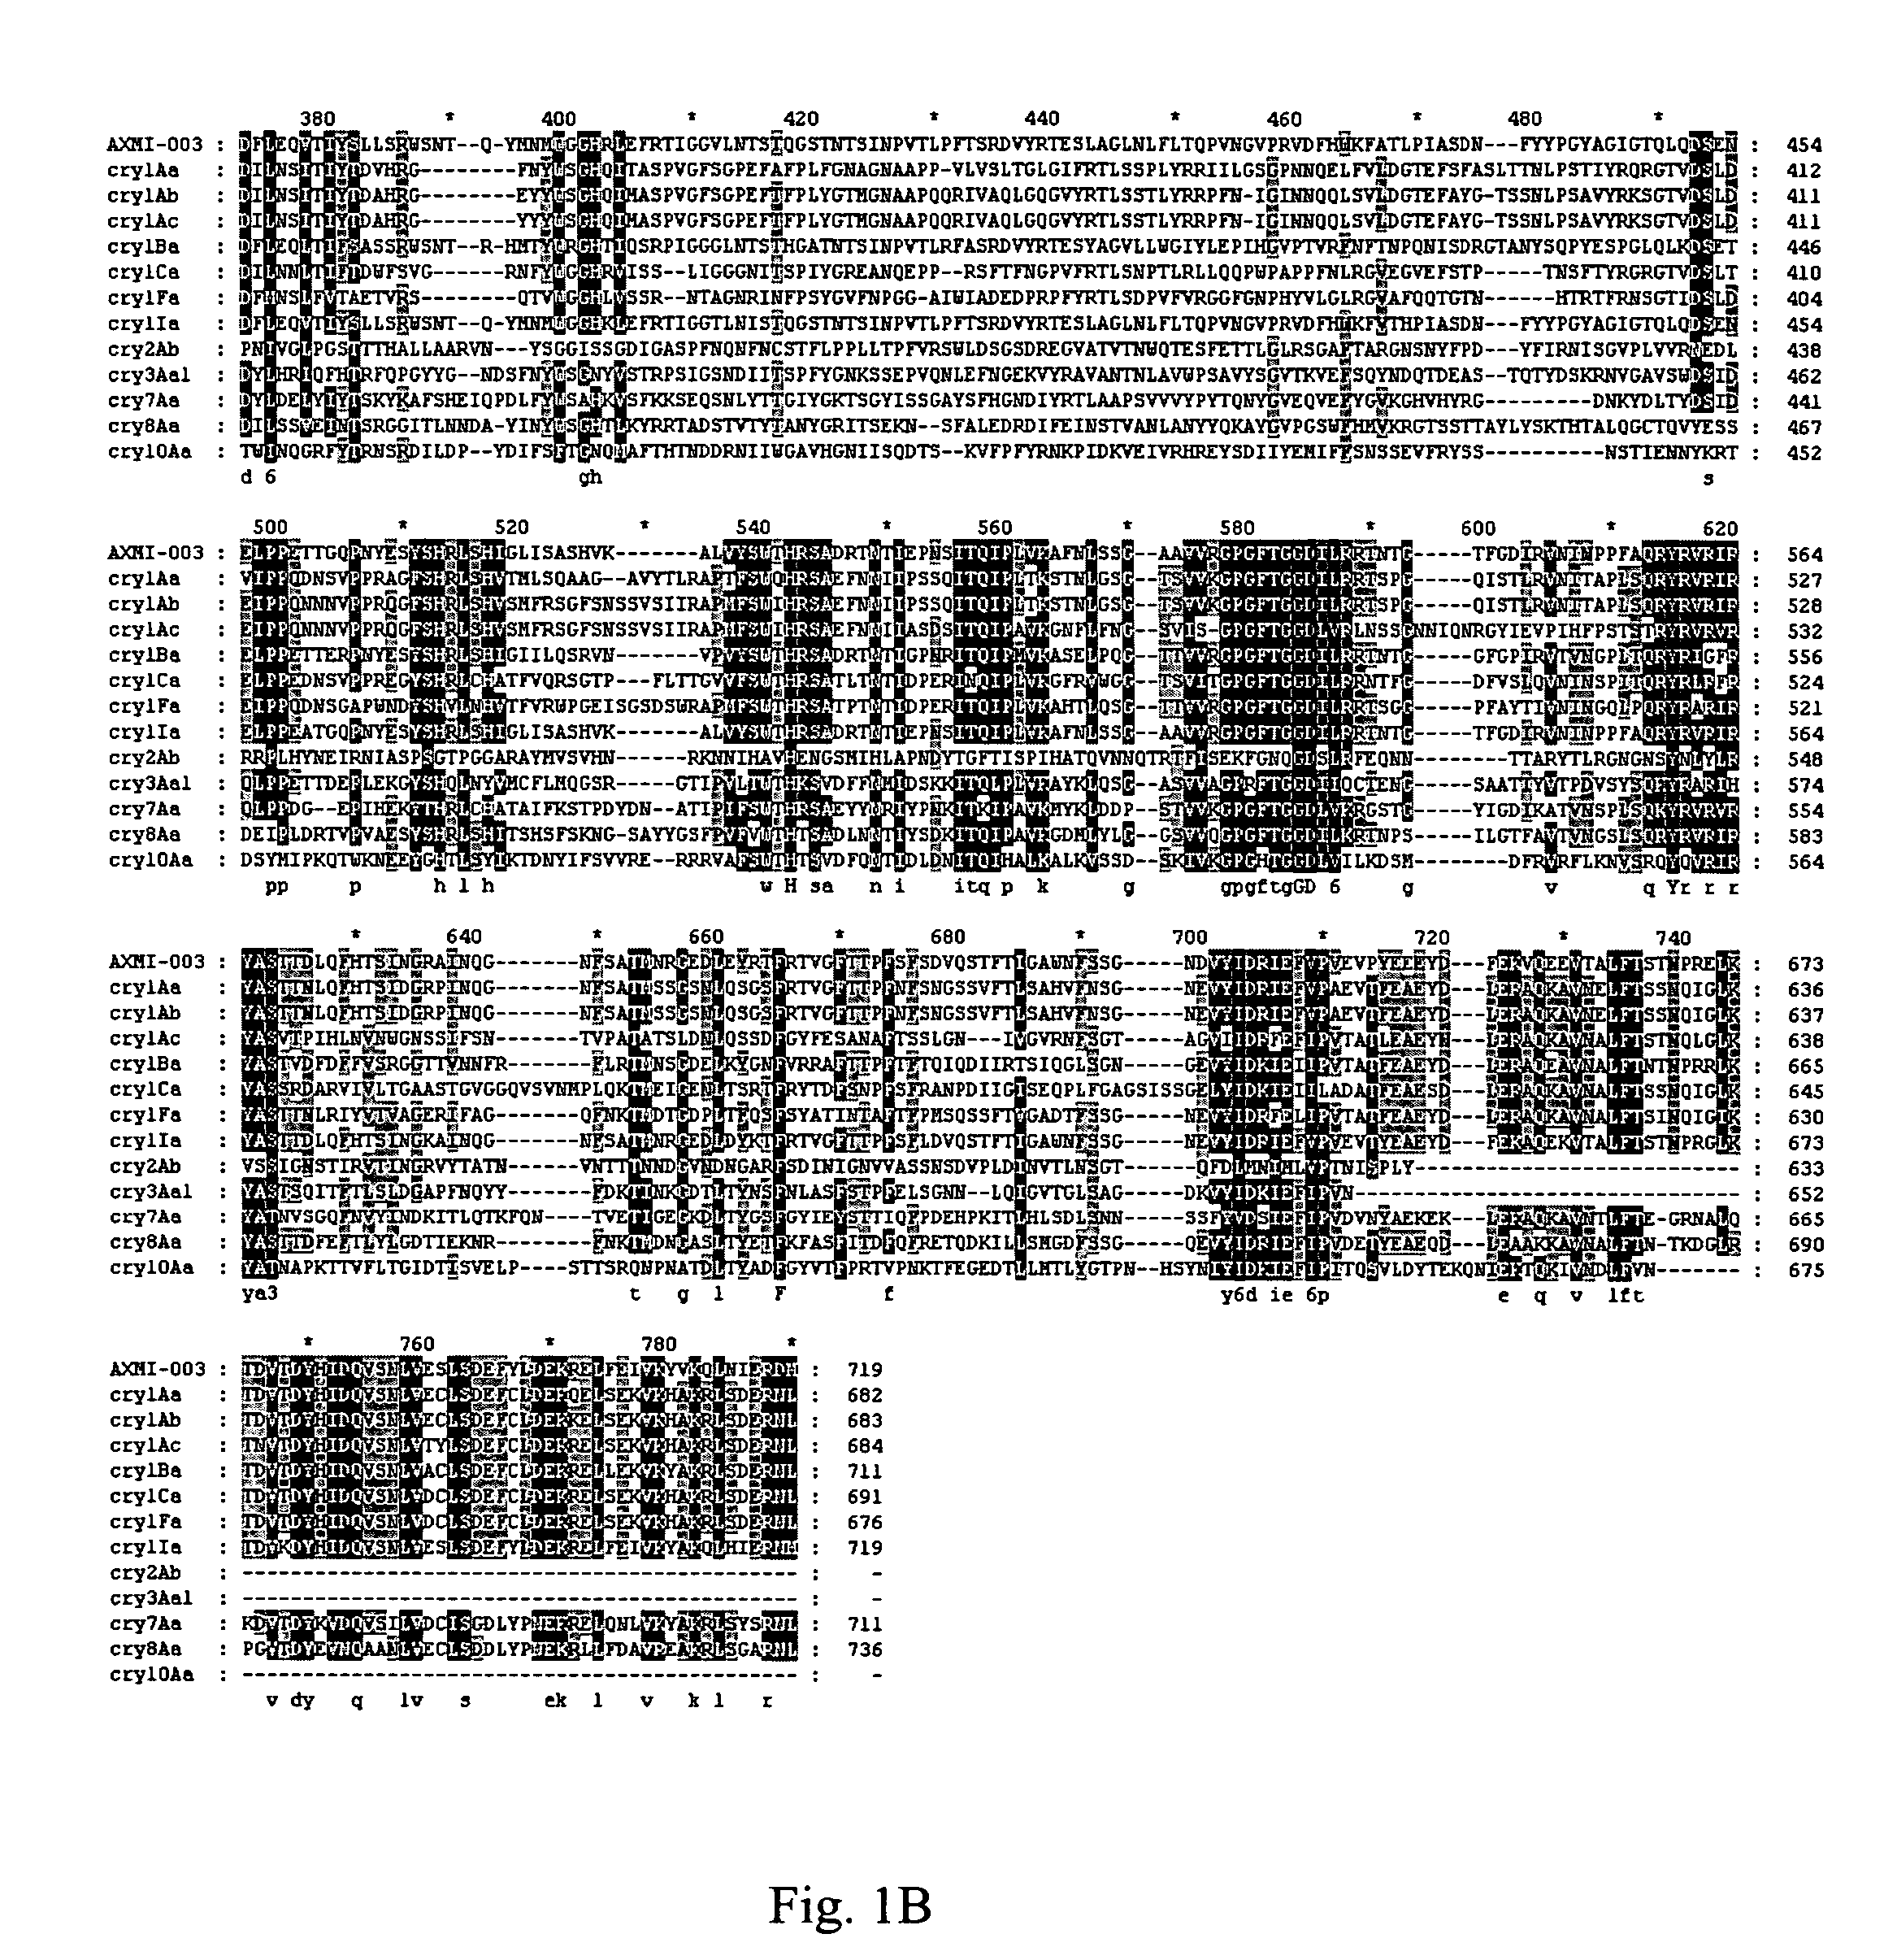 AXMI-003, a delta-endotoxin gene and methods for its use